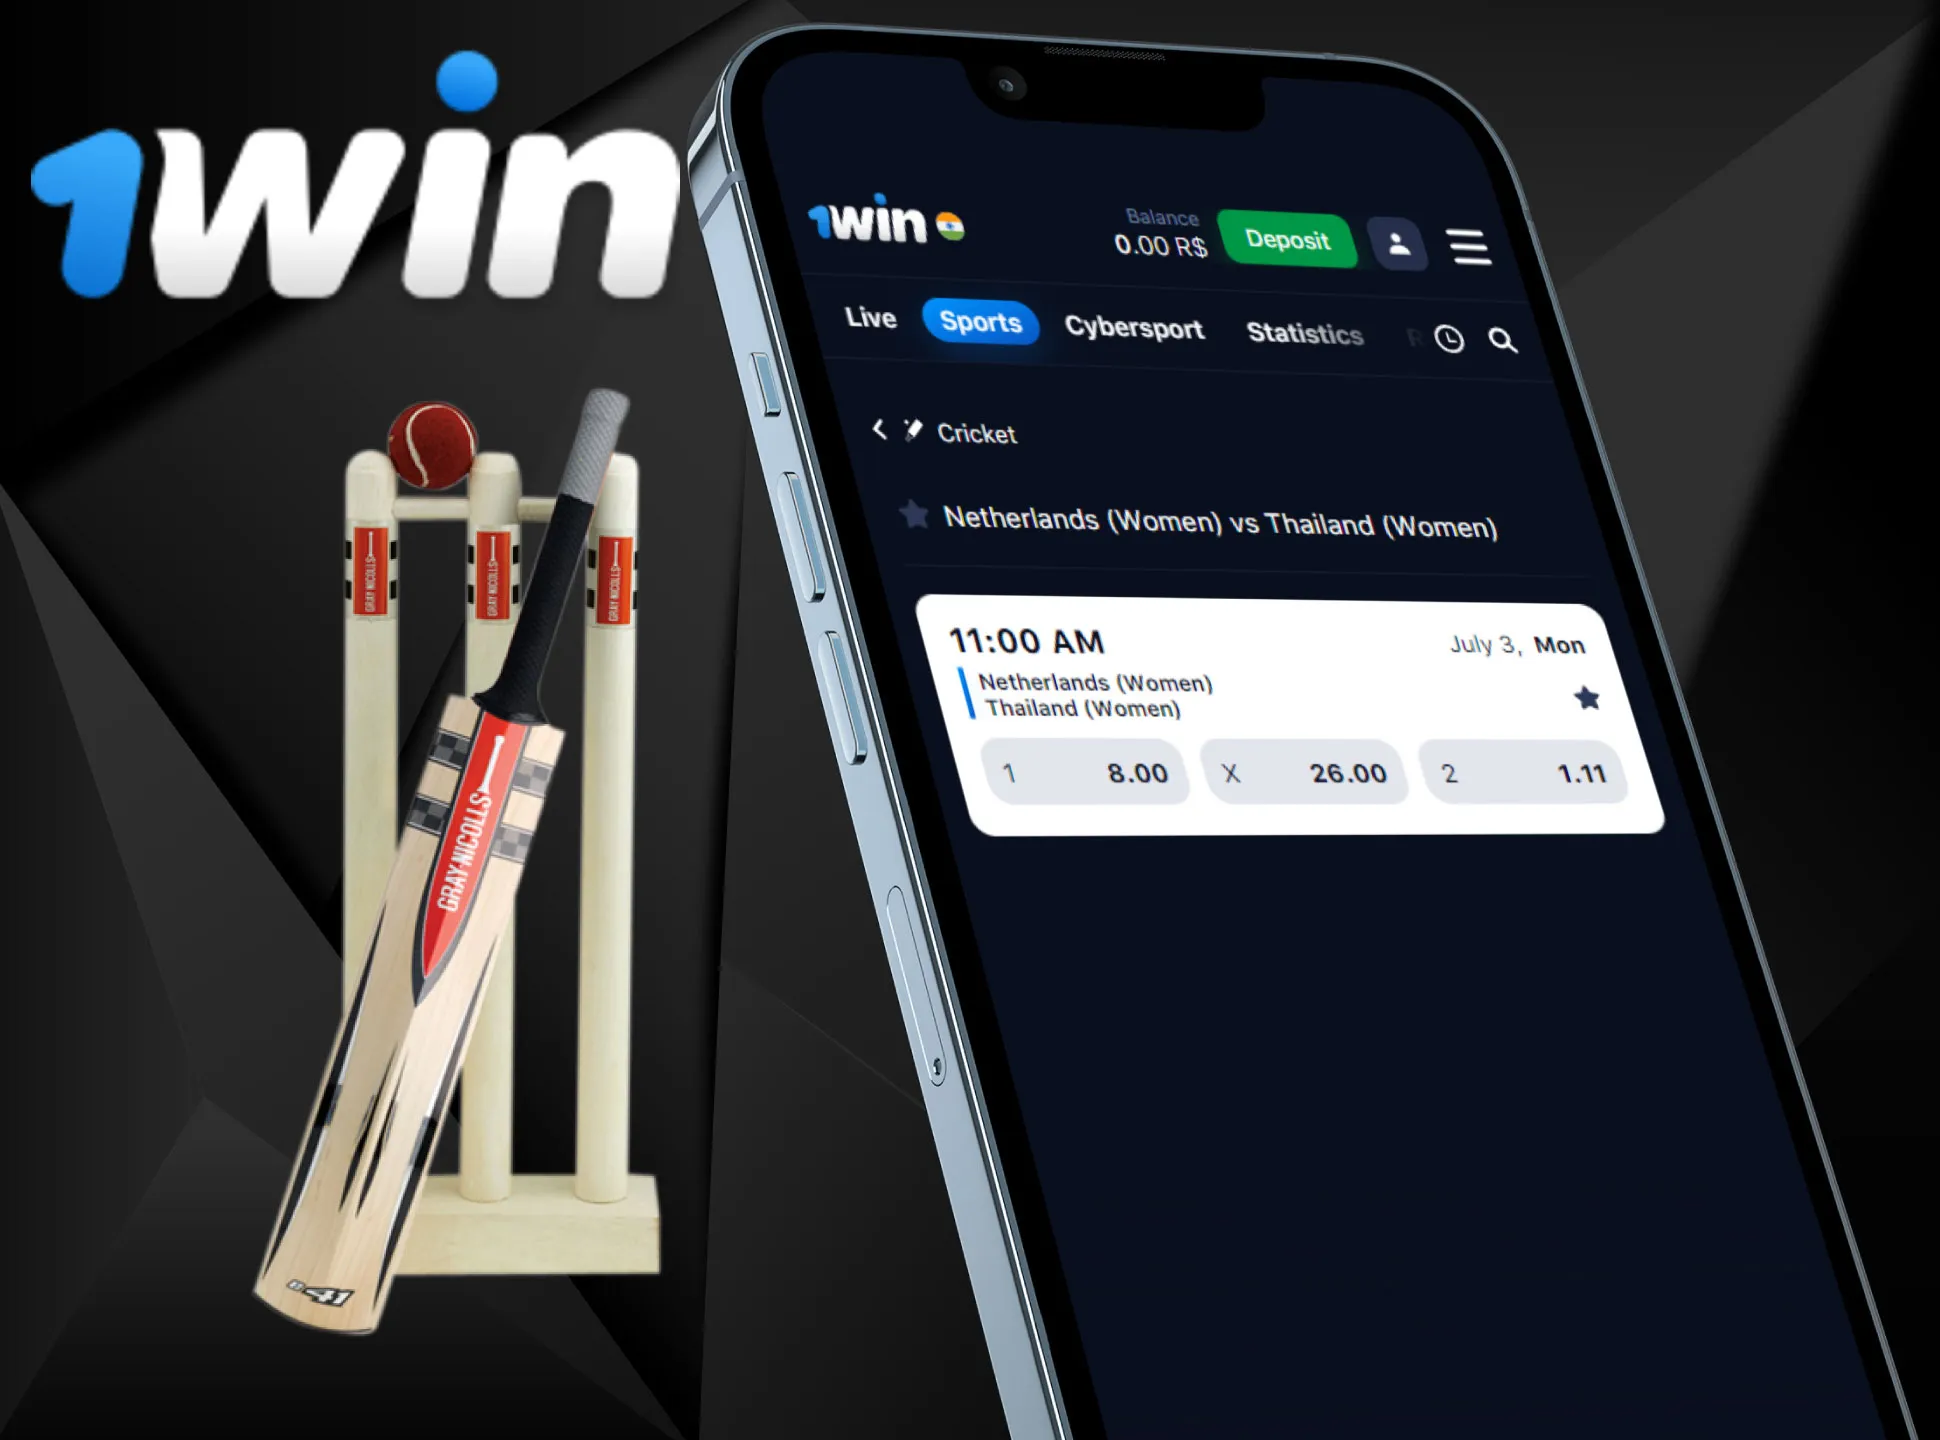 1win app gives opportunity to play on Indian rupees.